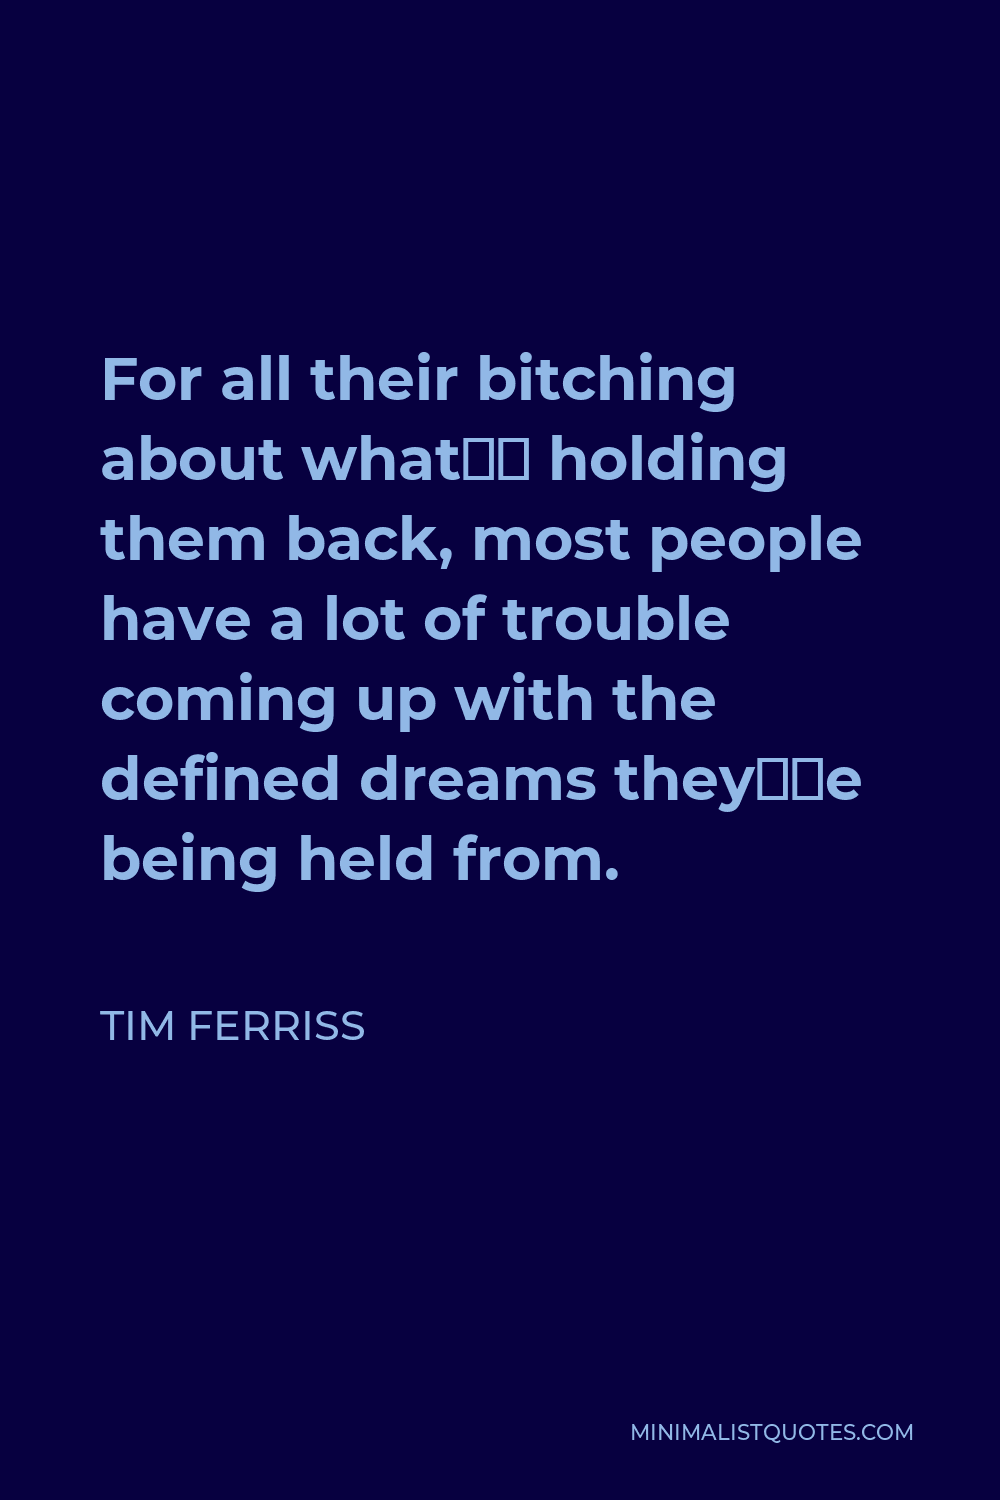 Tim Ferriss Quote - For all their bitching about what’s holding them back, most people have a lot of trouble coming up with the defined dreams they’re being held from.